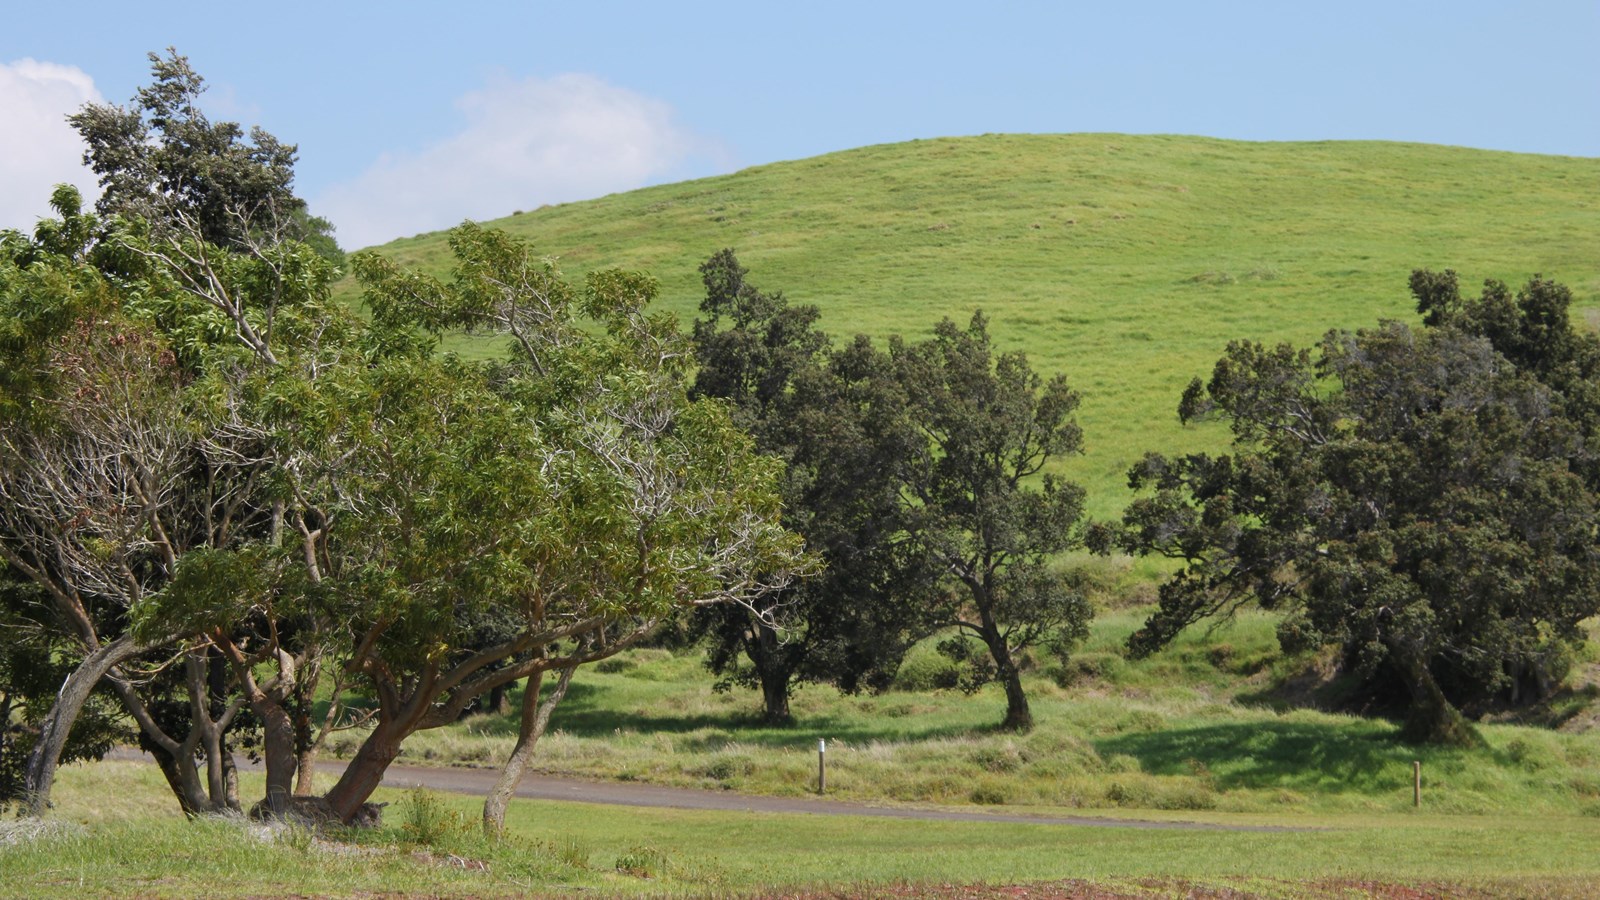 A green hill with trees in the foreground